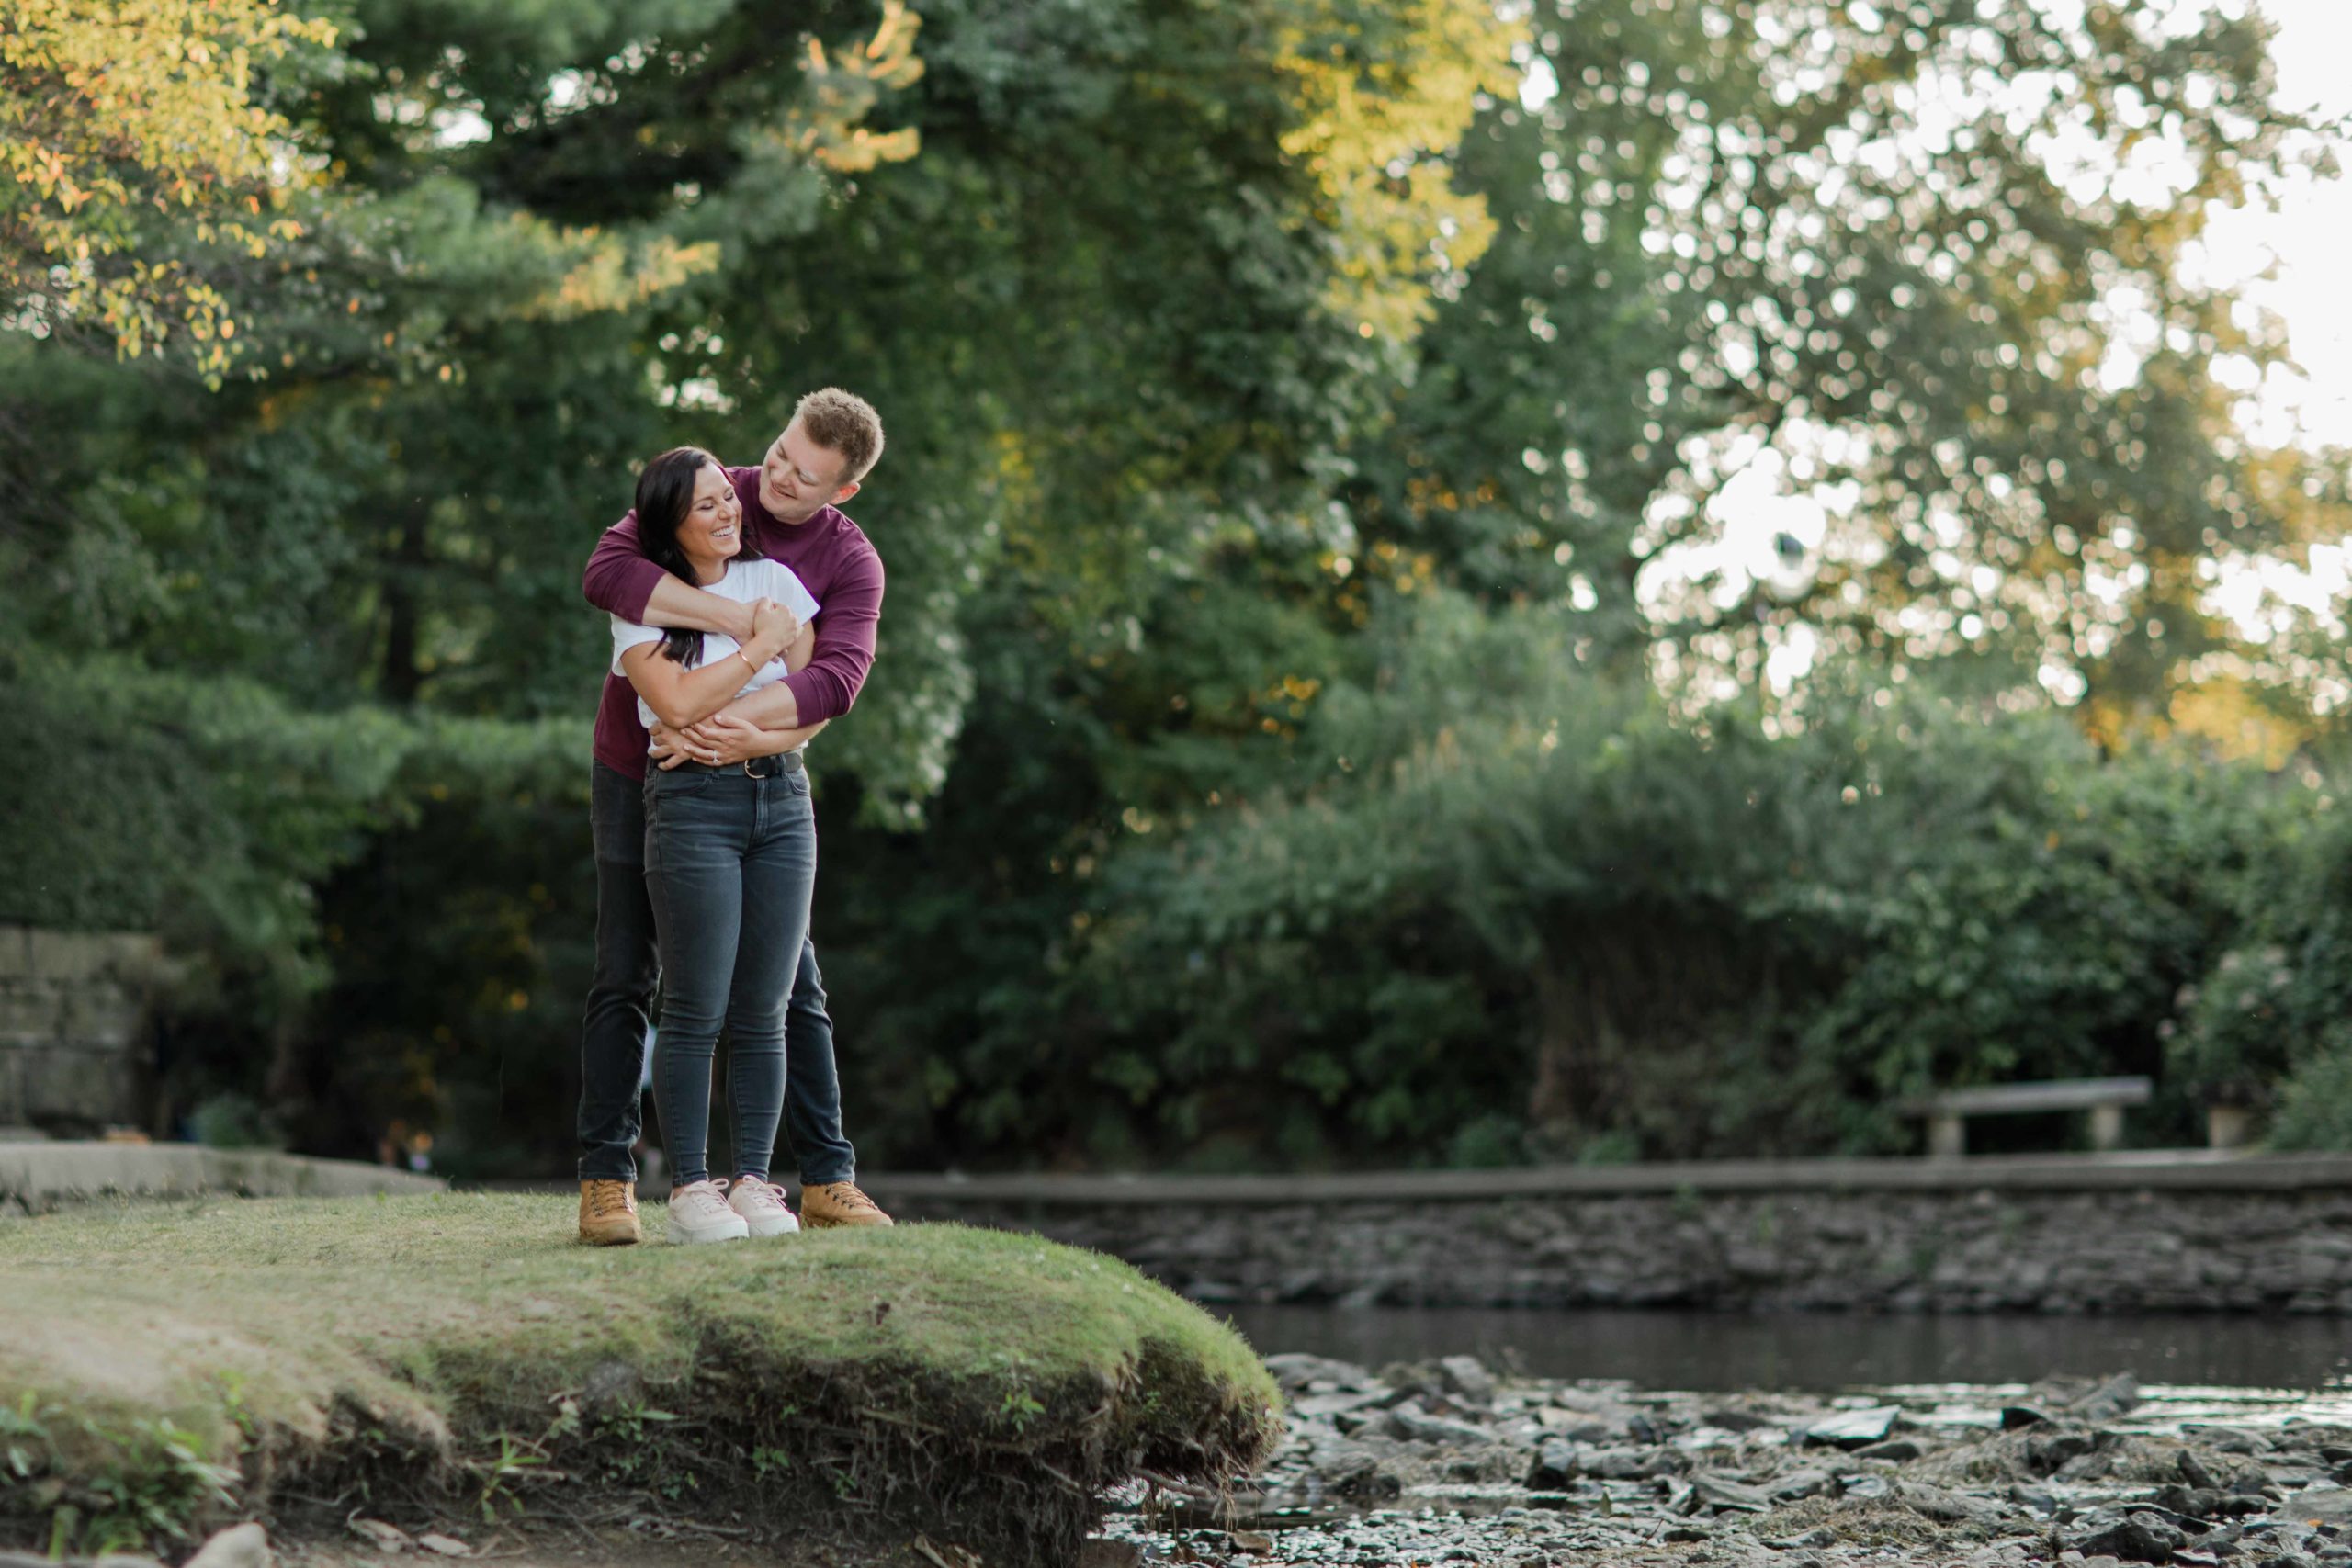 Naperville Riverwalk Summer Engagement Photography by Illinois Photographer